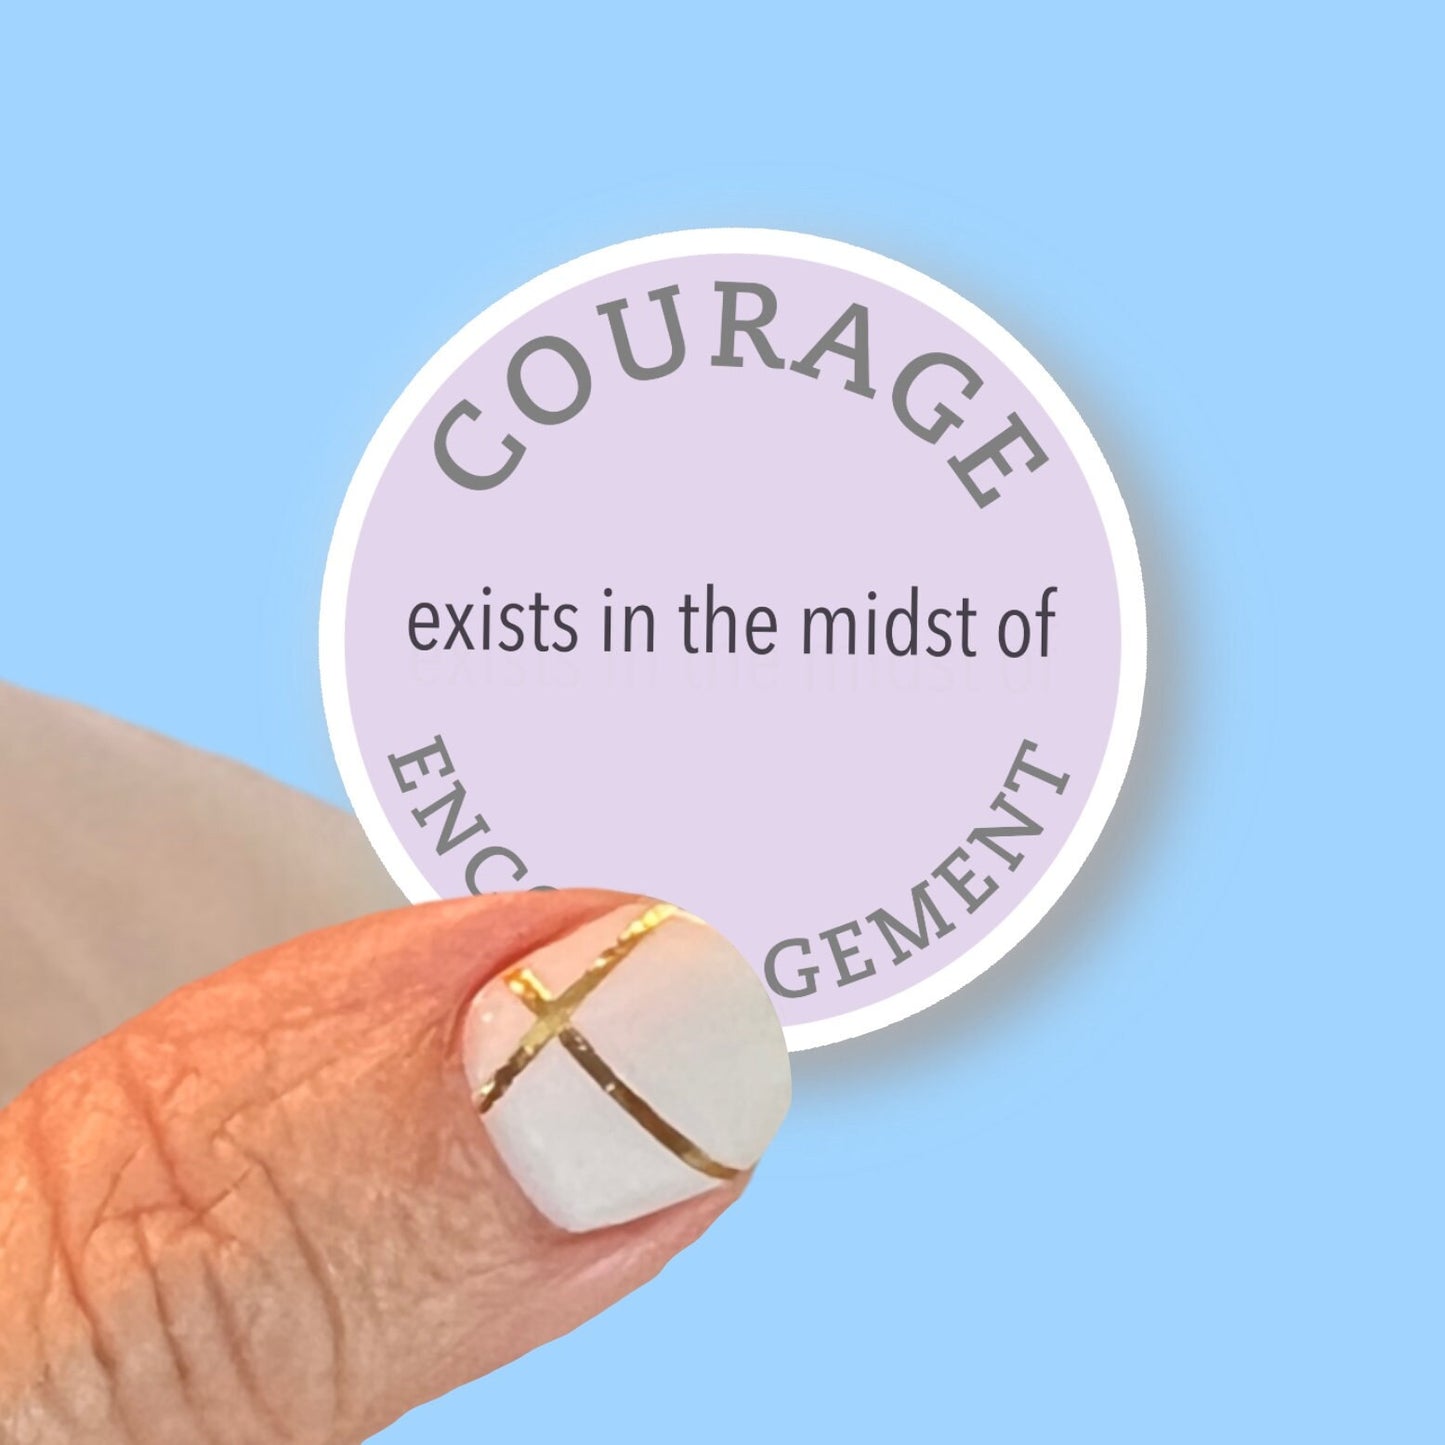 Courage exists in the midst of Encouragement - Christian Faith UV/ Waterproof Vinyl Sticker/ Decal- Choice of Size, Single or Bulk qty